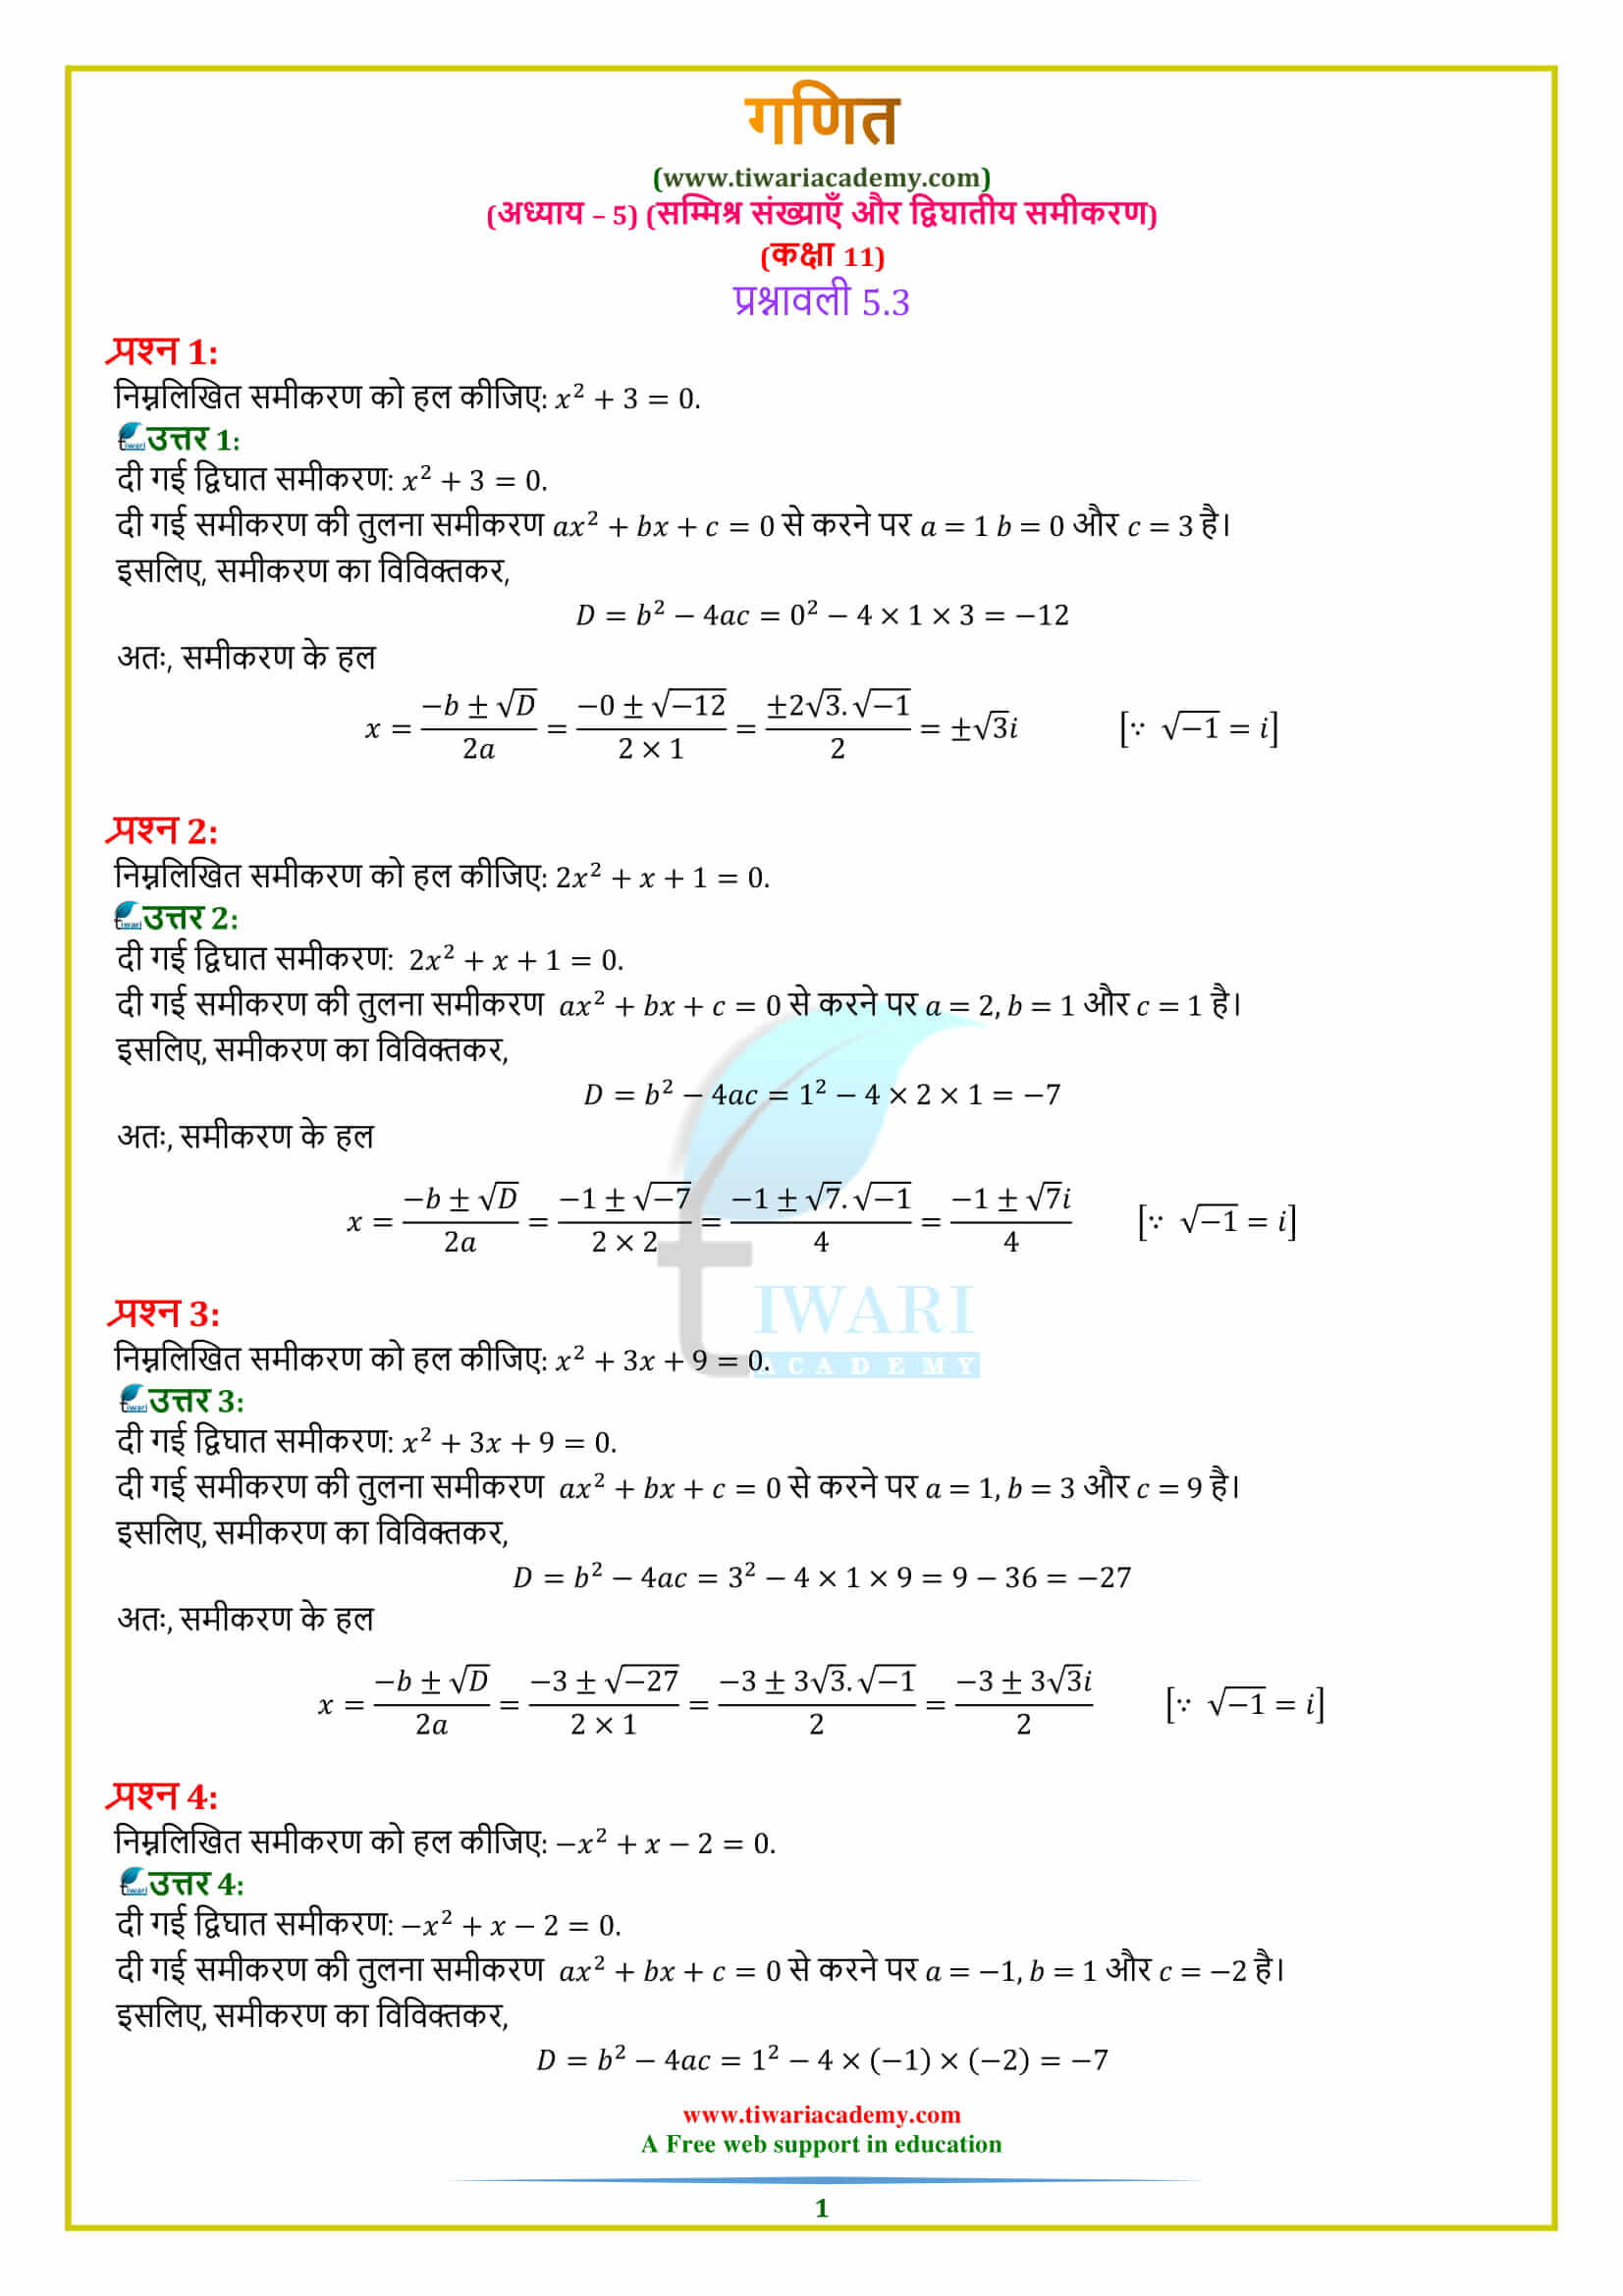 Class 11 Maths Chapter 5 Exercise 5.3 sols in Hindi